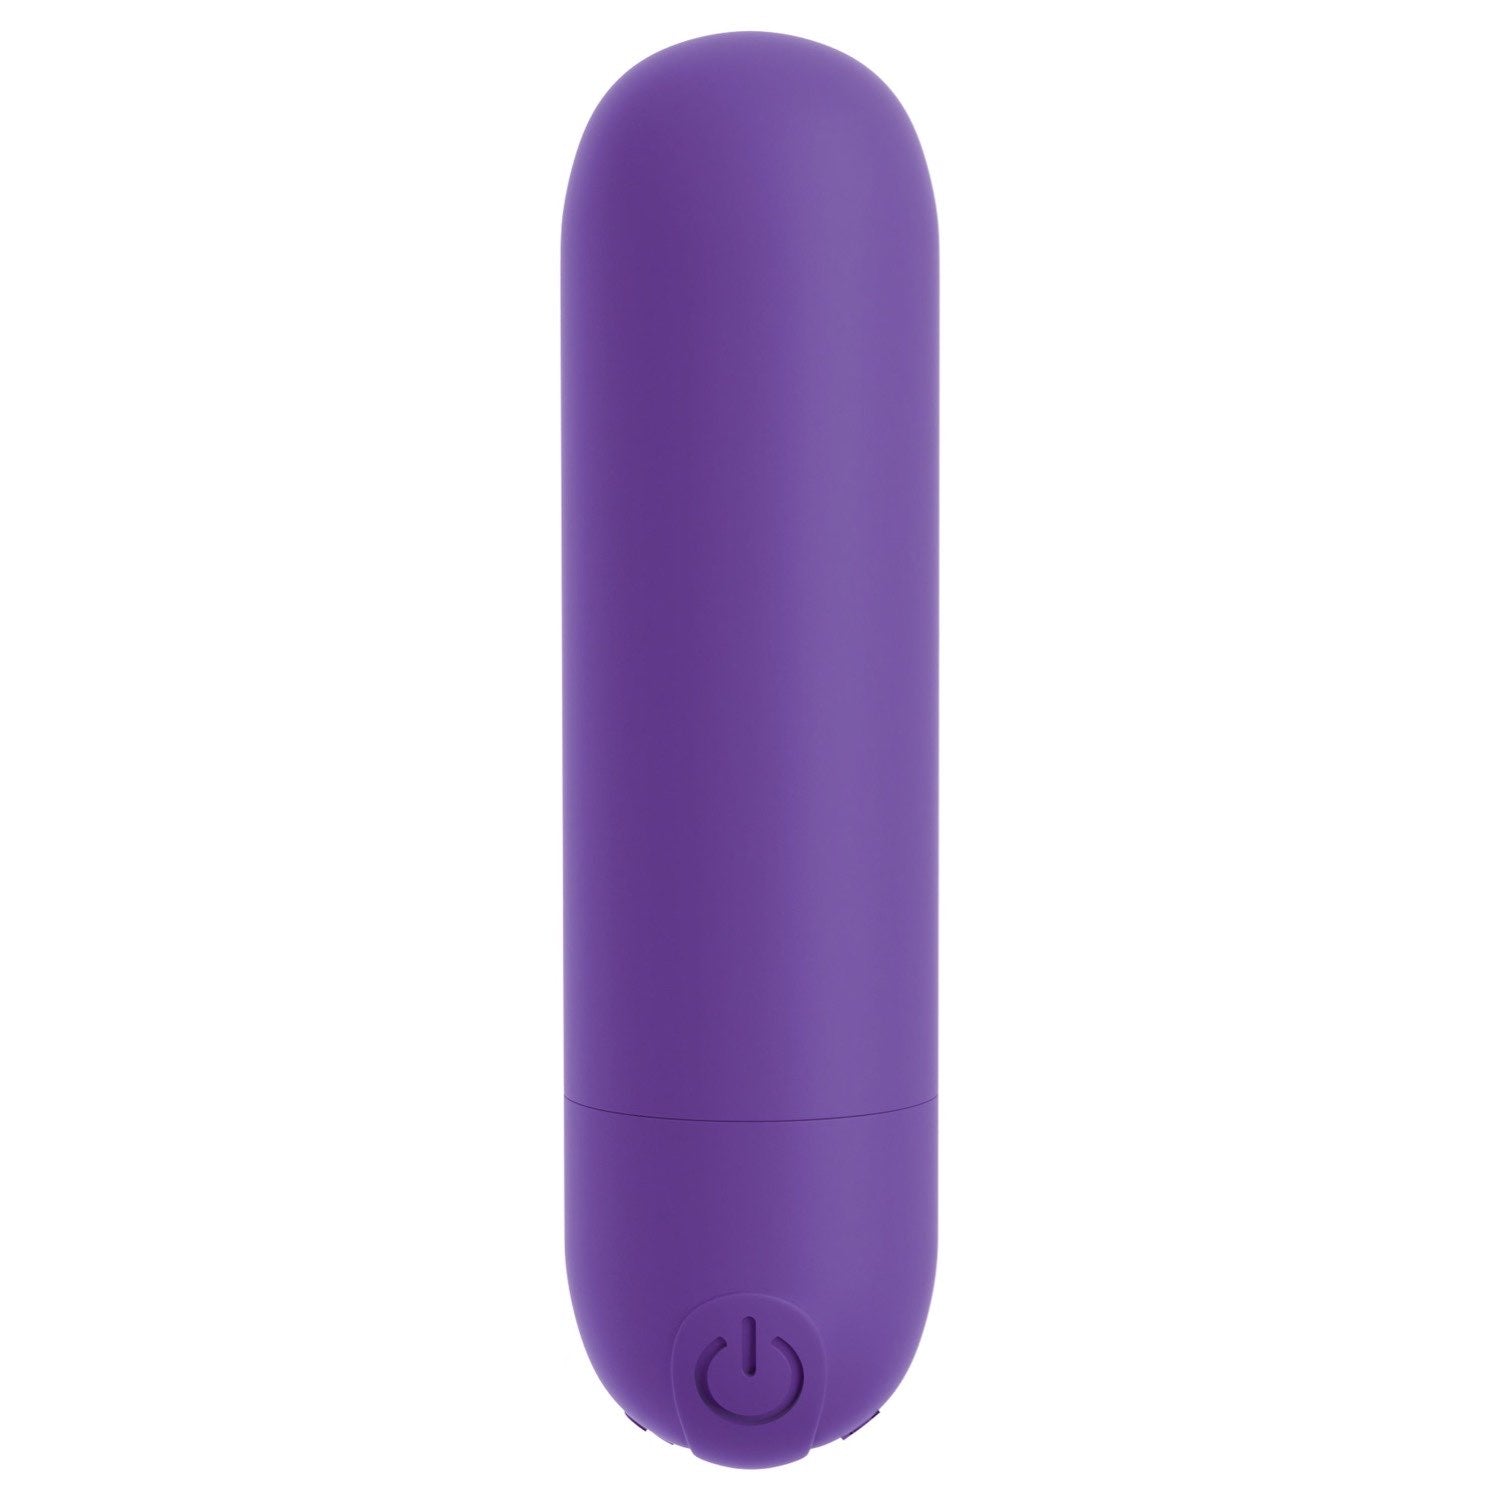 Omg! OMG! Bullets #Play - Purple USB Rechargeable Bullet by Pipedream